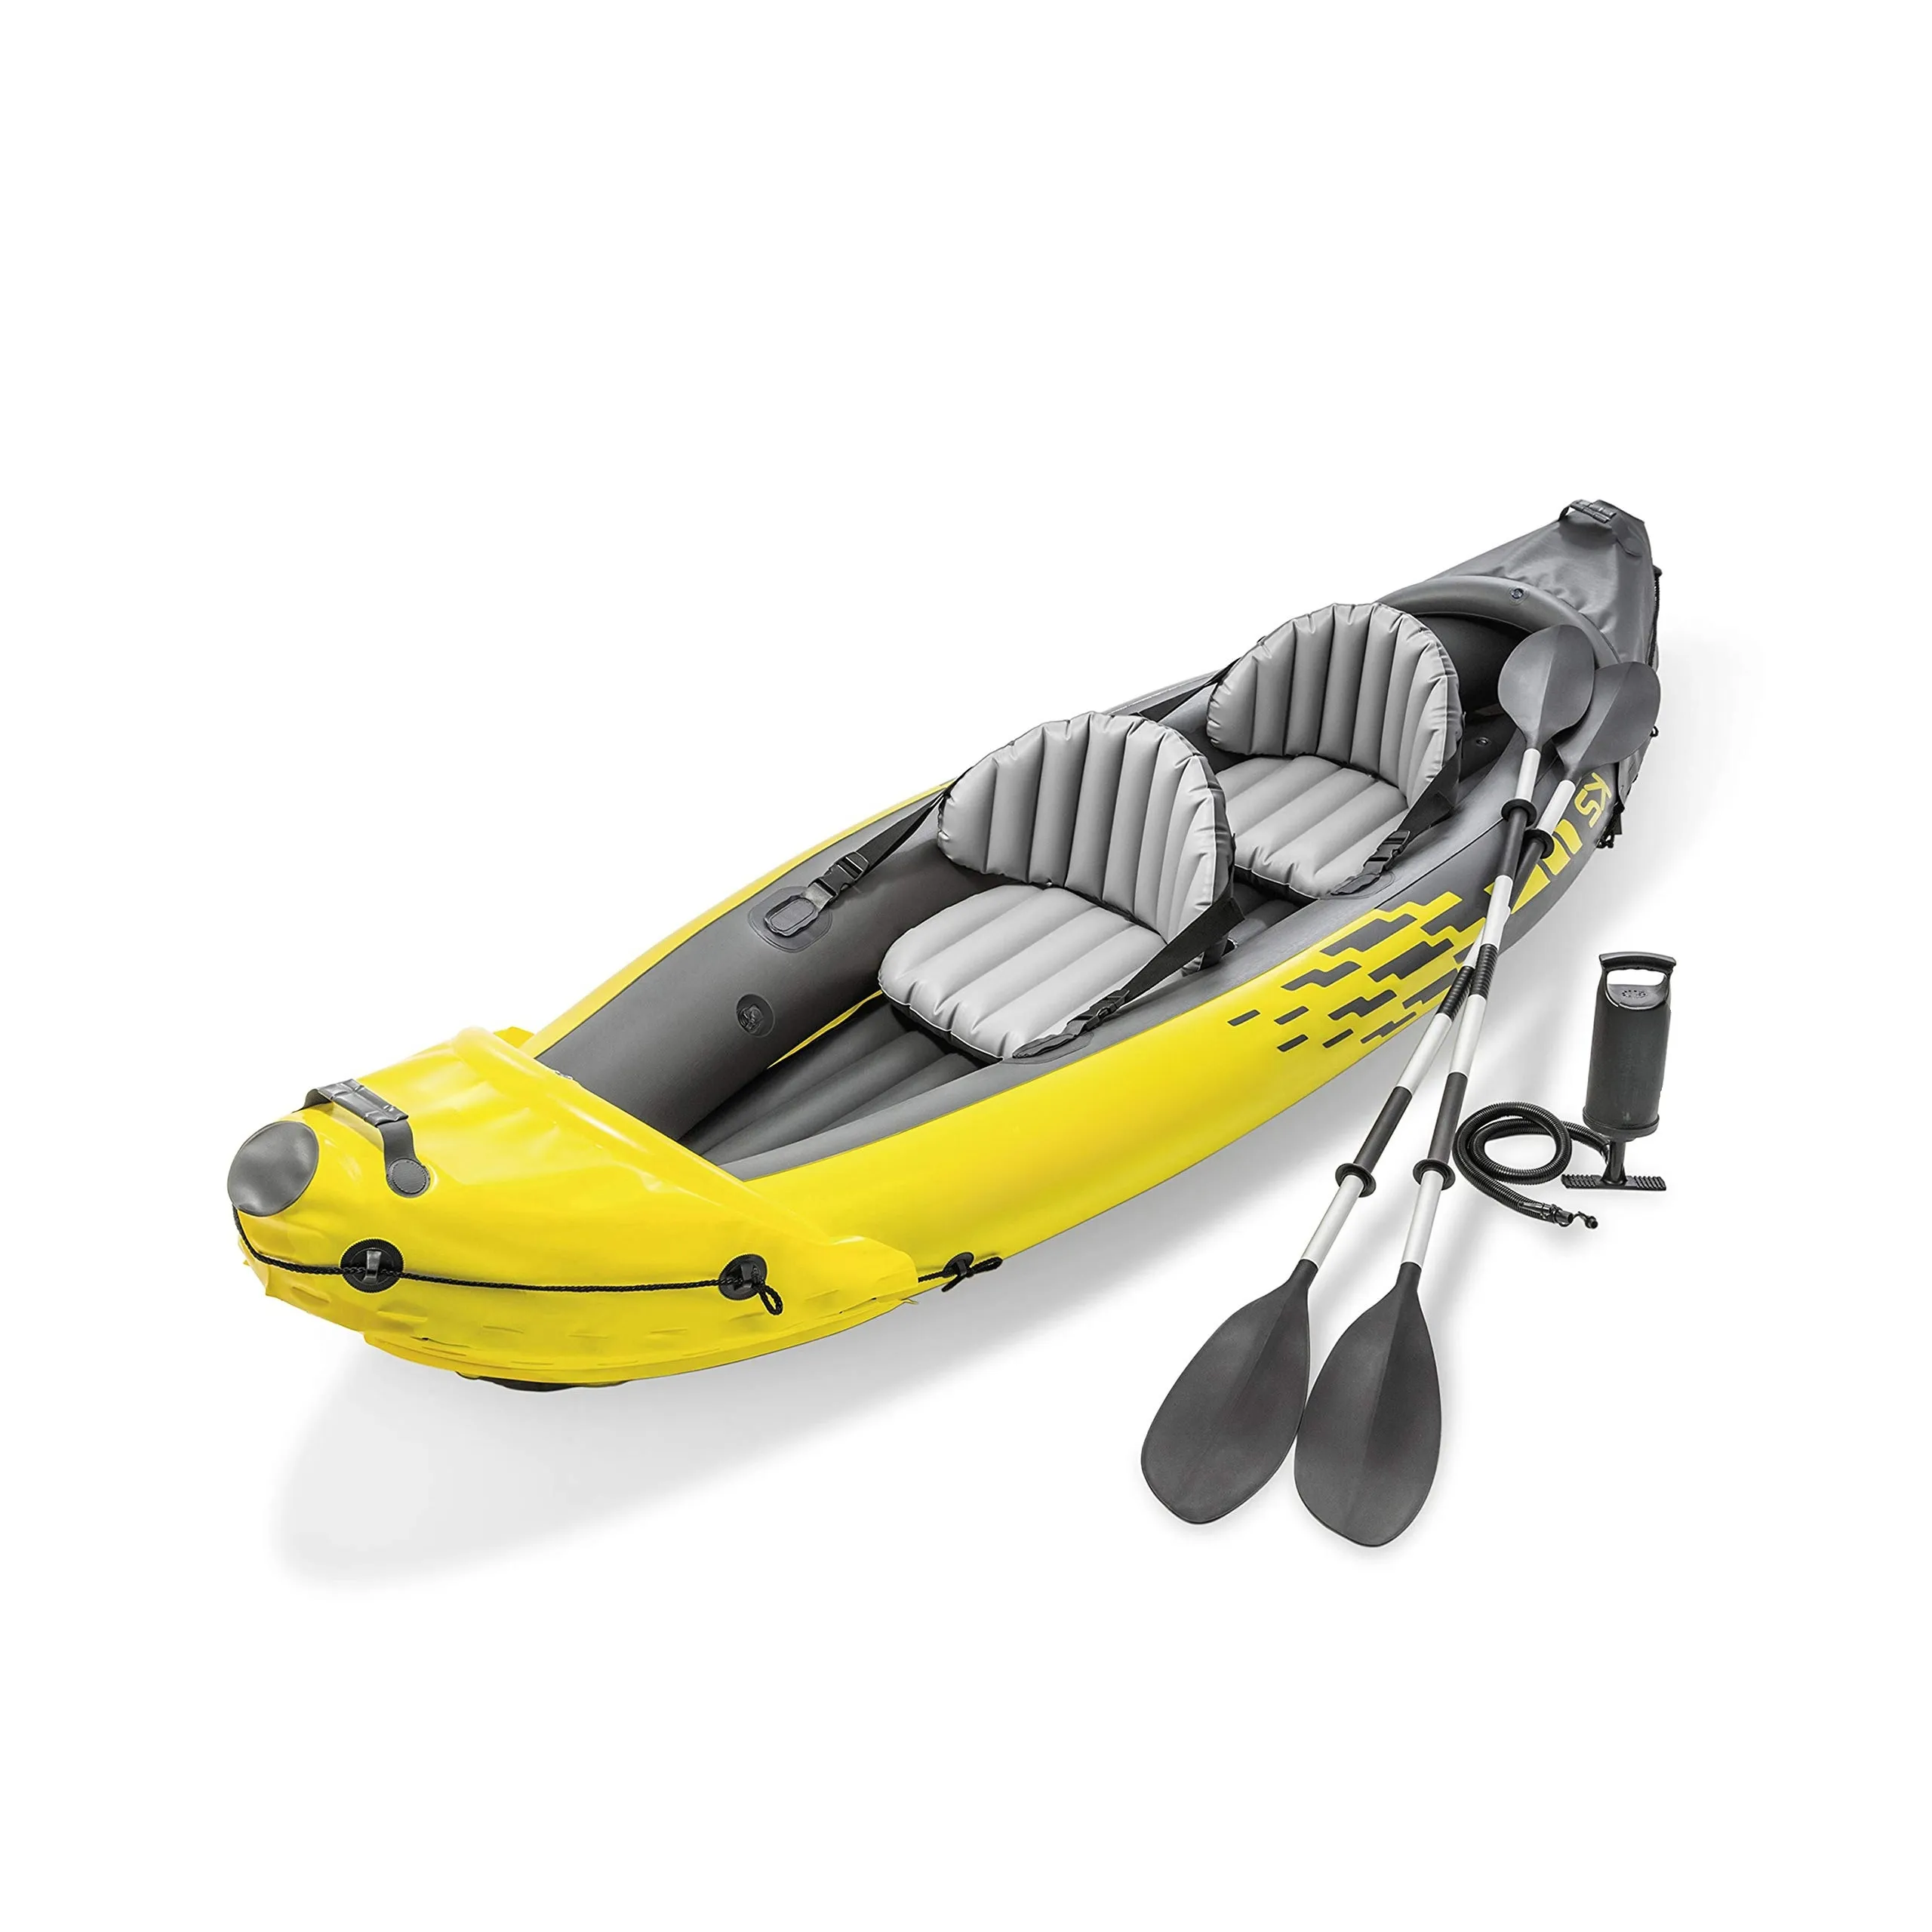 Ventas calientes Pedal inflable Kayak 2 asientos Inflable Drop Stitch Kayak al aire libre Fisning Canoa Rafting Boat